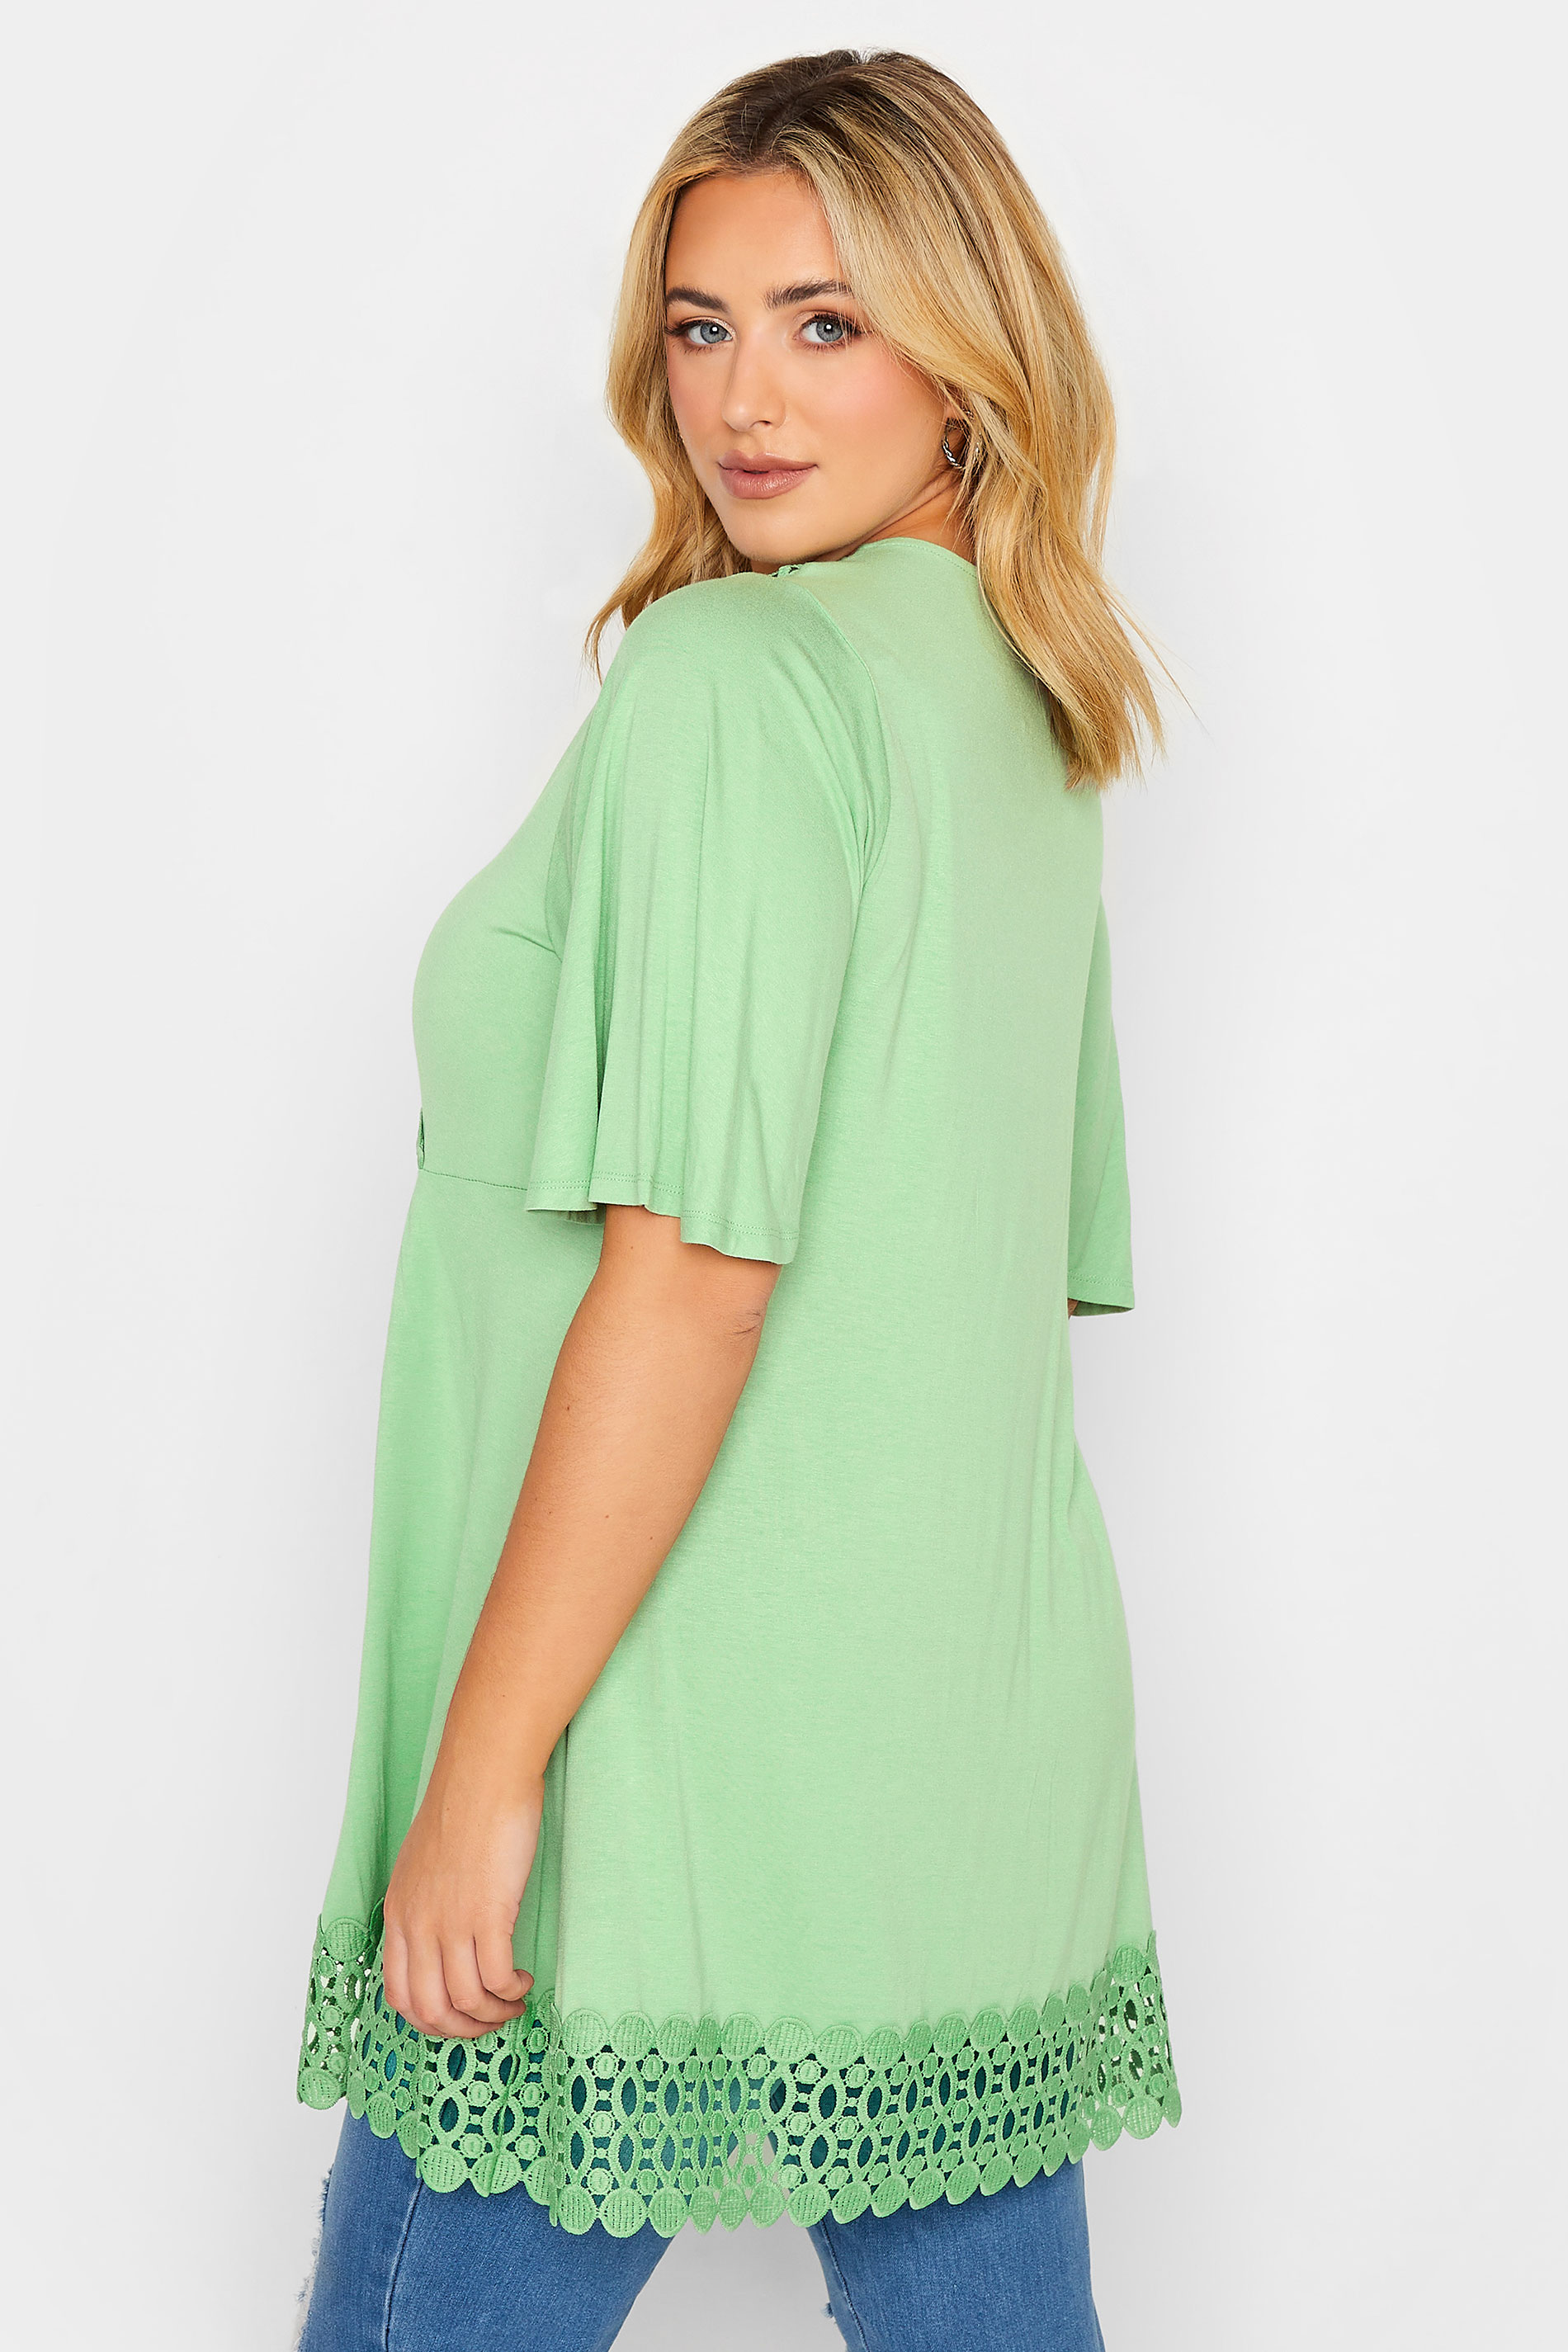 YOURS Plus Size Curve Green Crochet Detail Peplum Tunic Top | Yours Clothing  3